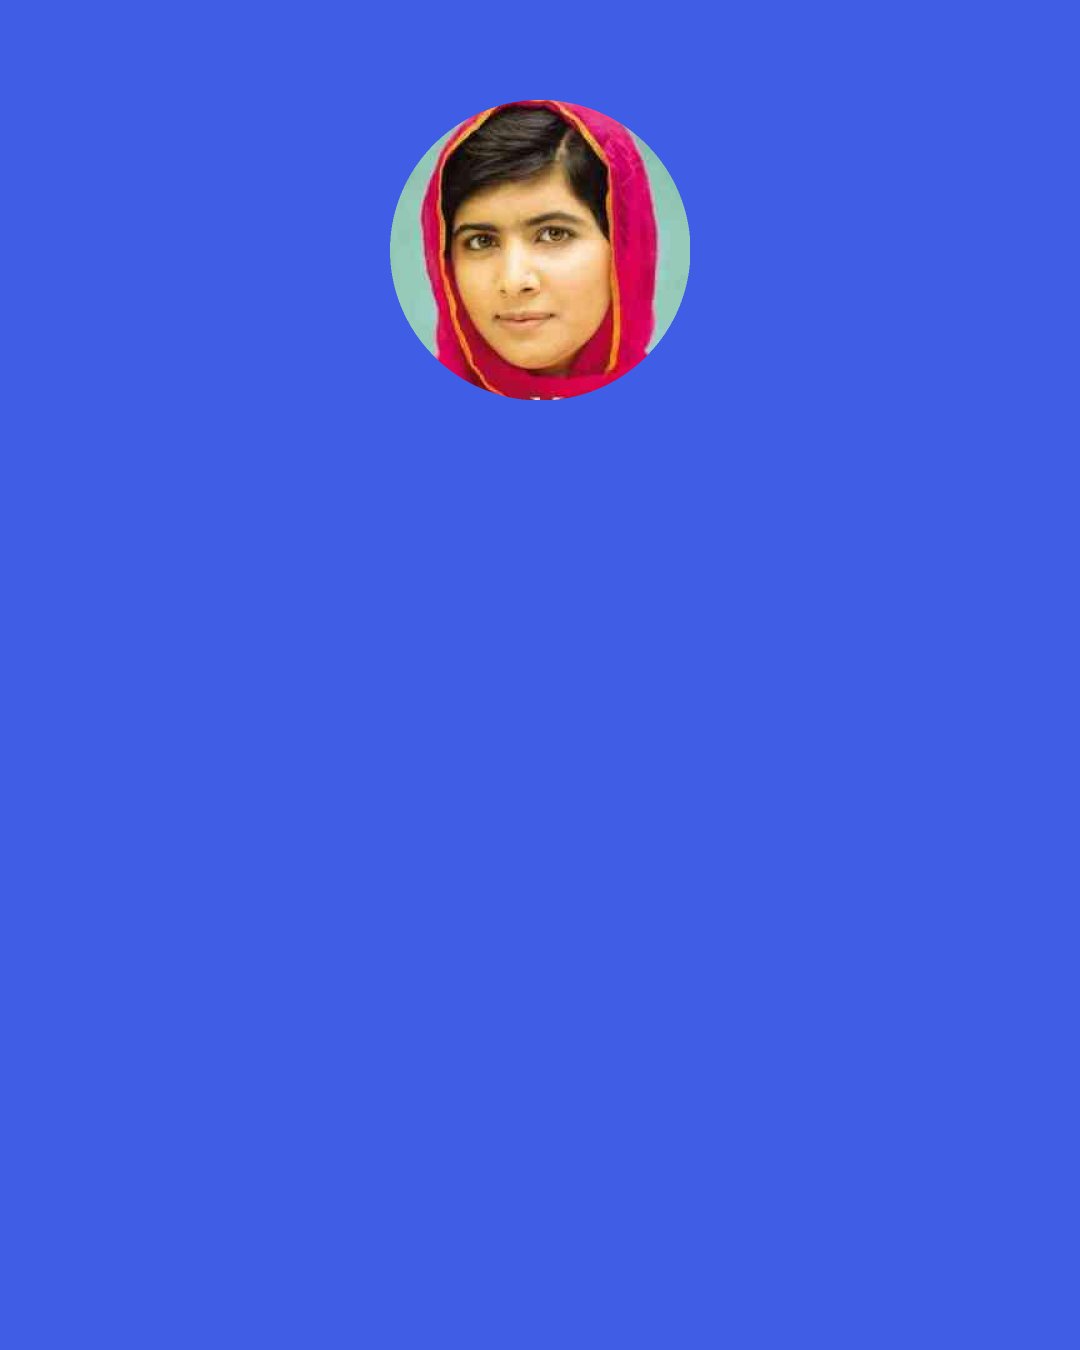 Malala Yousafzai: I told myself, Malala, you have already faced death. This is your second life. Don't be afraid — if you are afraid, you can't move forward.